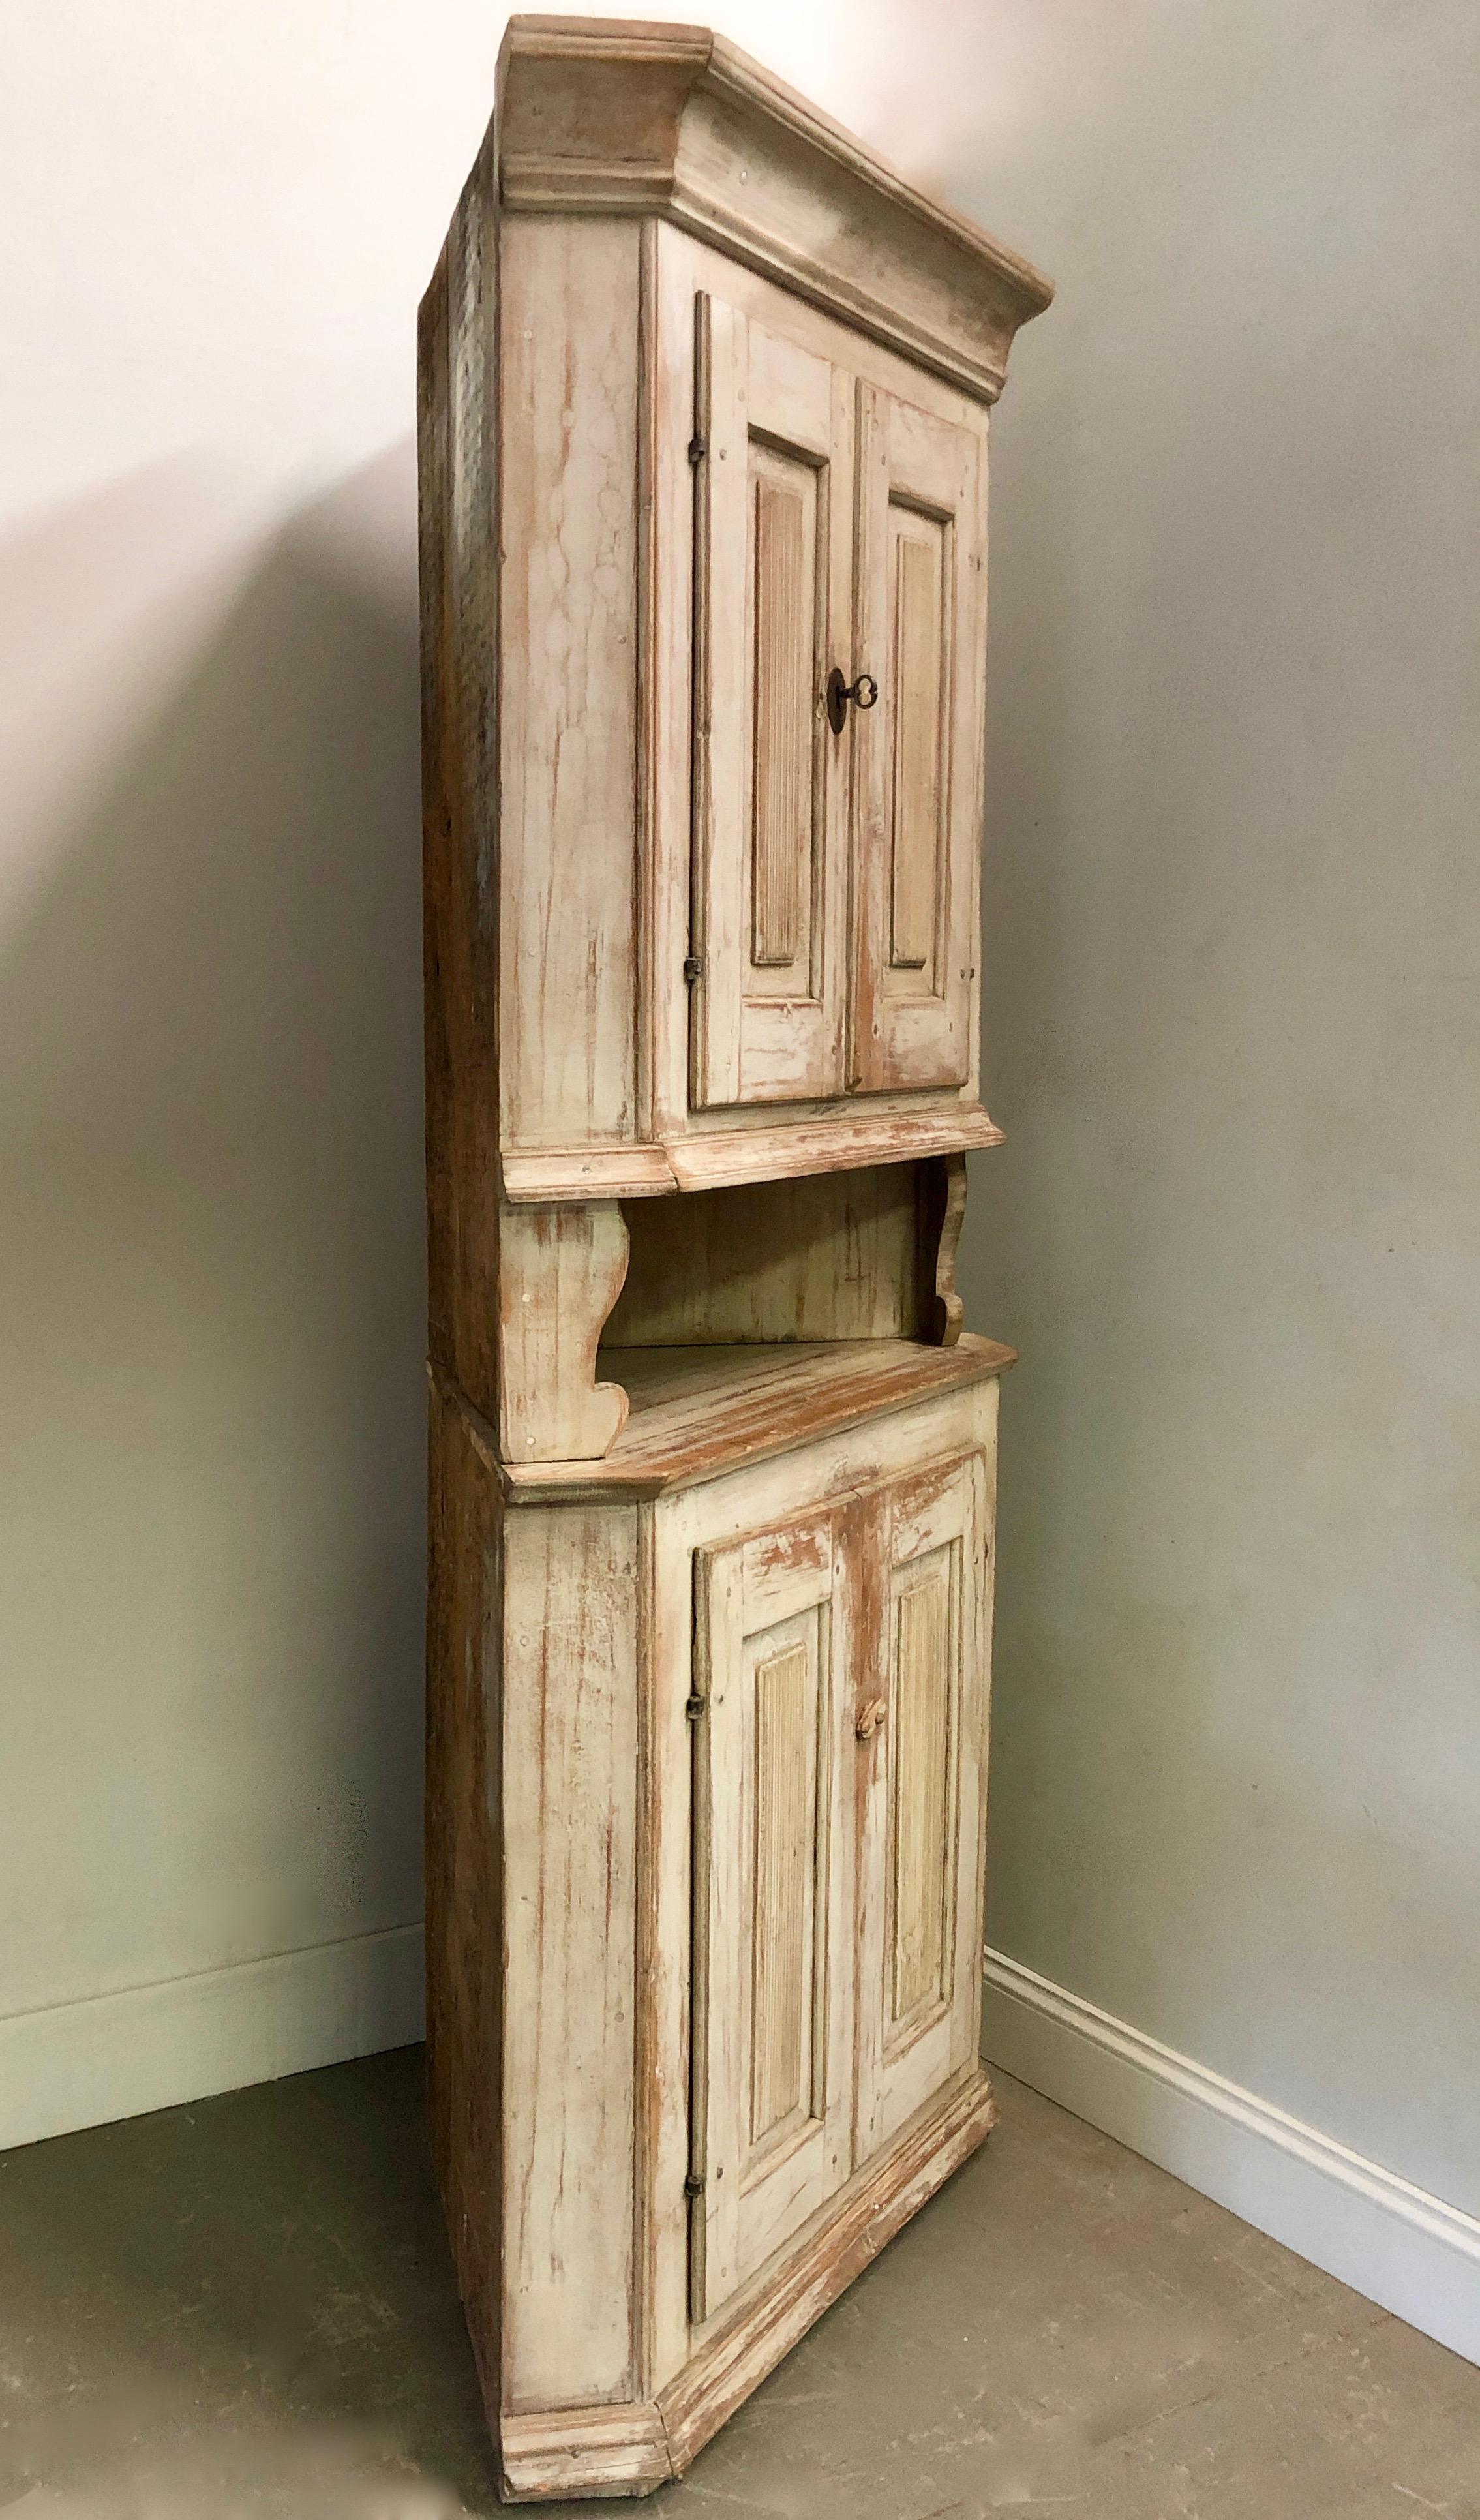 Charming early 19th century painted Swedish corner cabinet in two parts with reeded panelled doors and small cubby hole between the top and bottom in original time worn patina.
Sweden, circa 1800.
Surprising pieces and objects, authentic,